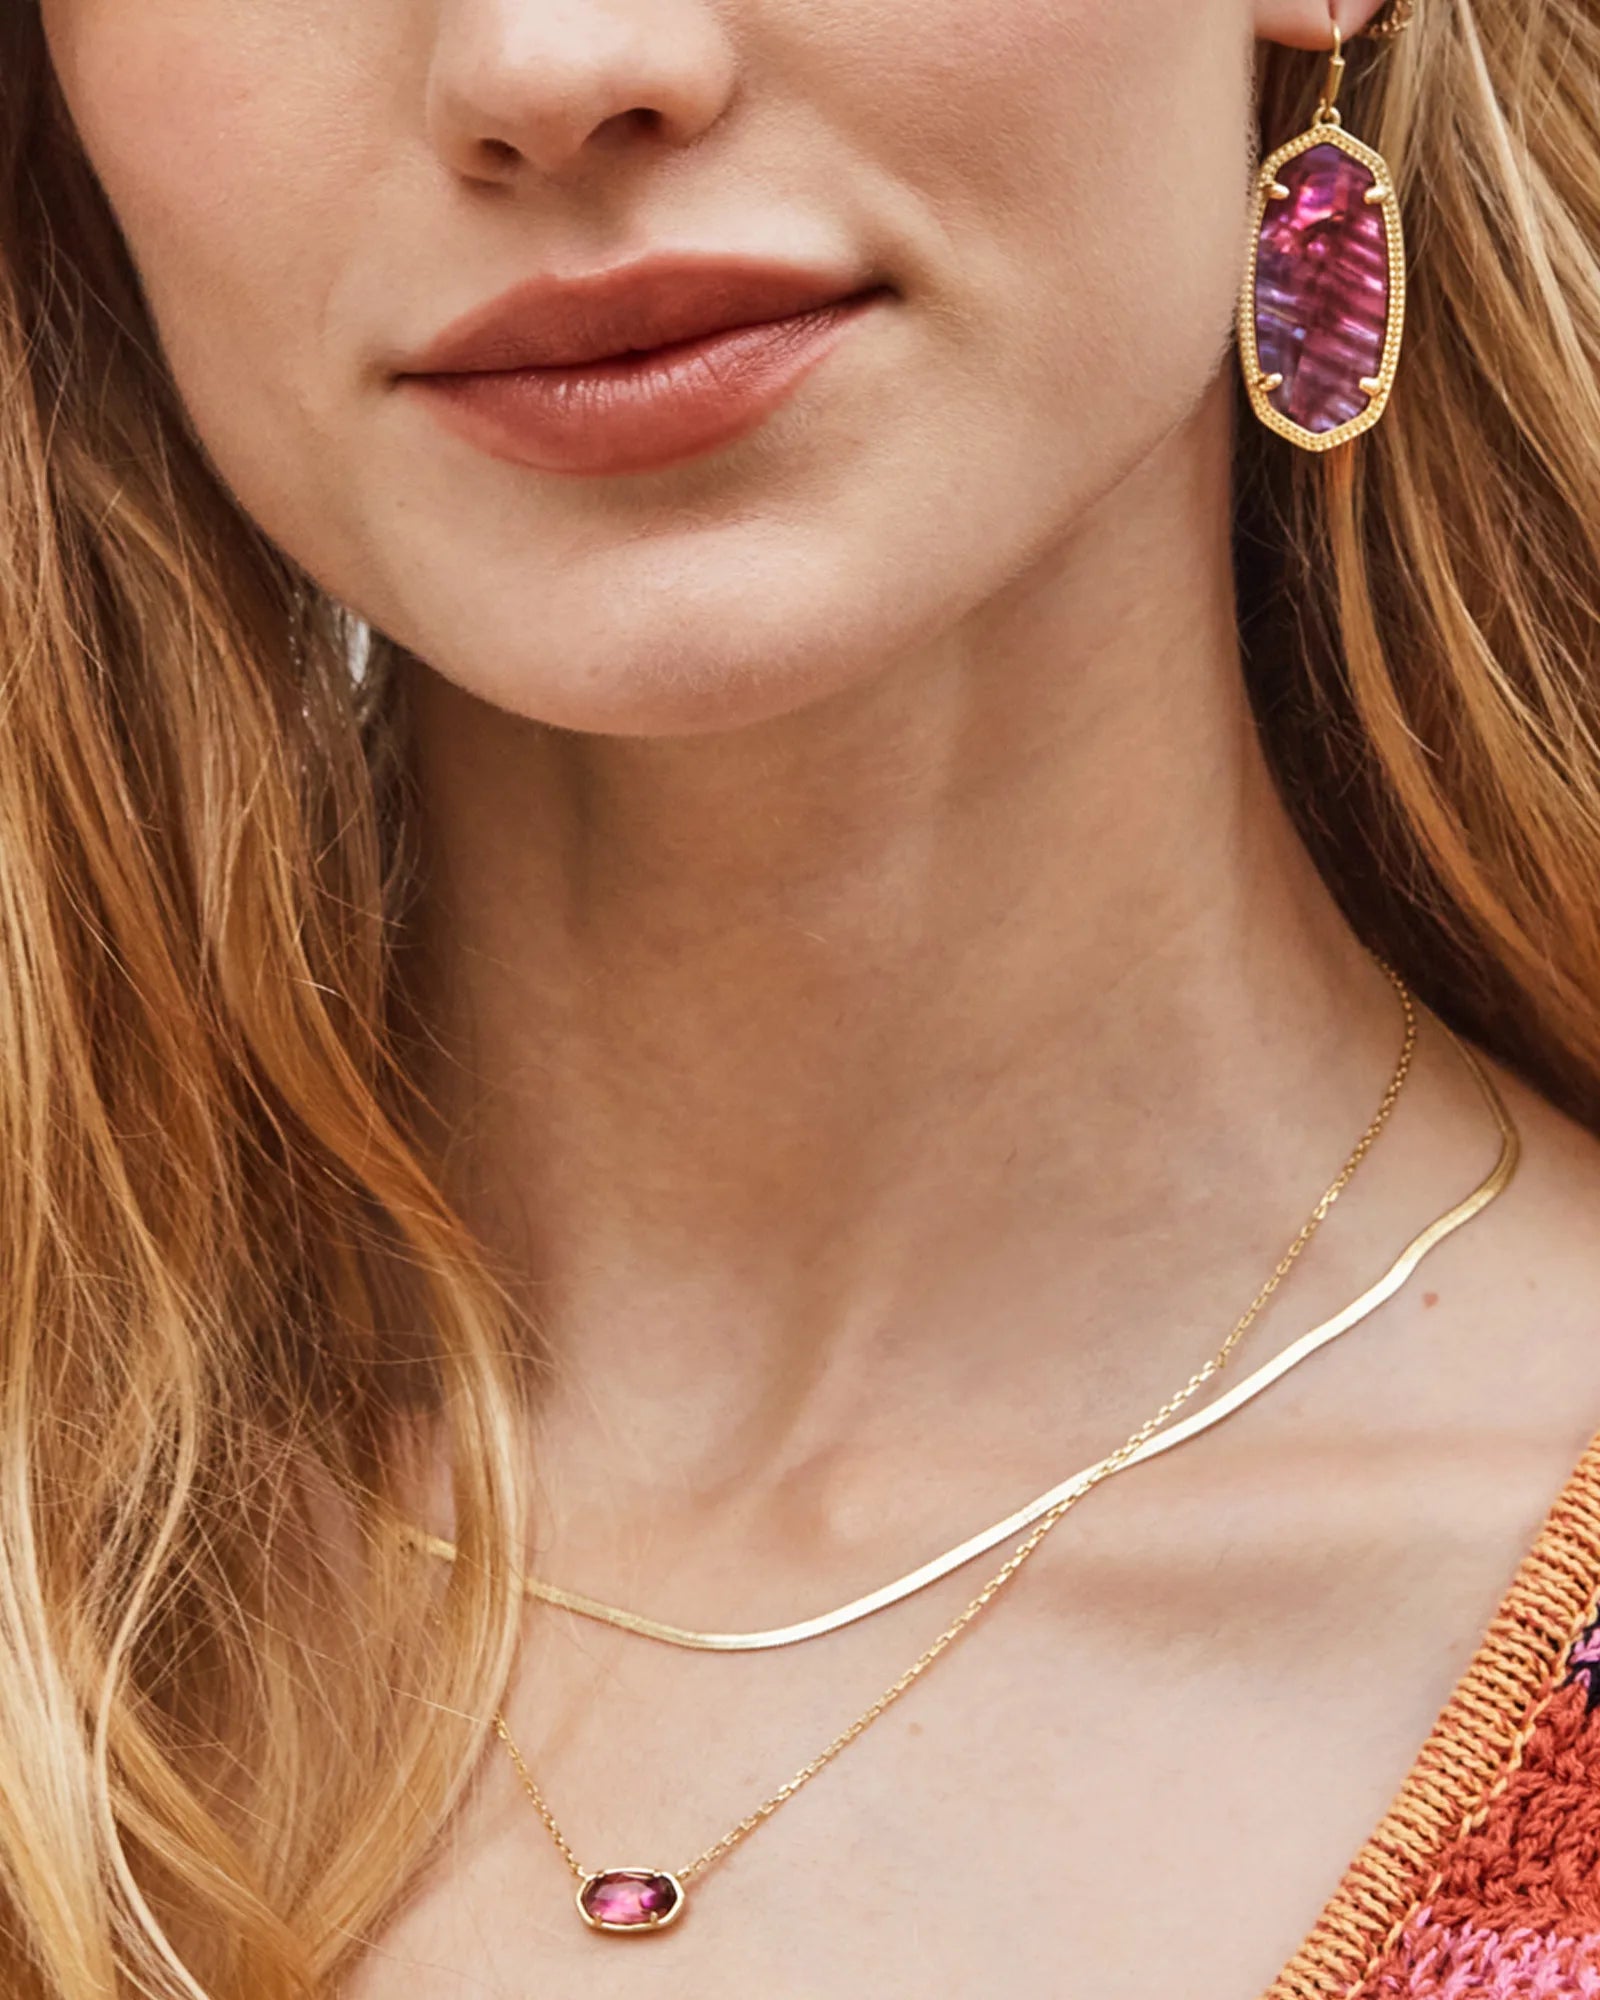 Kendra Scott | Grayson Herringbone Gold Multi Strand Necklace in Light Burgundy Illusion - Giddy Up Glamour Boutique